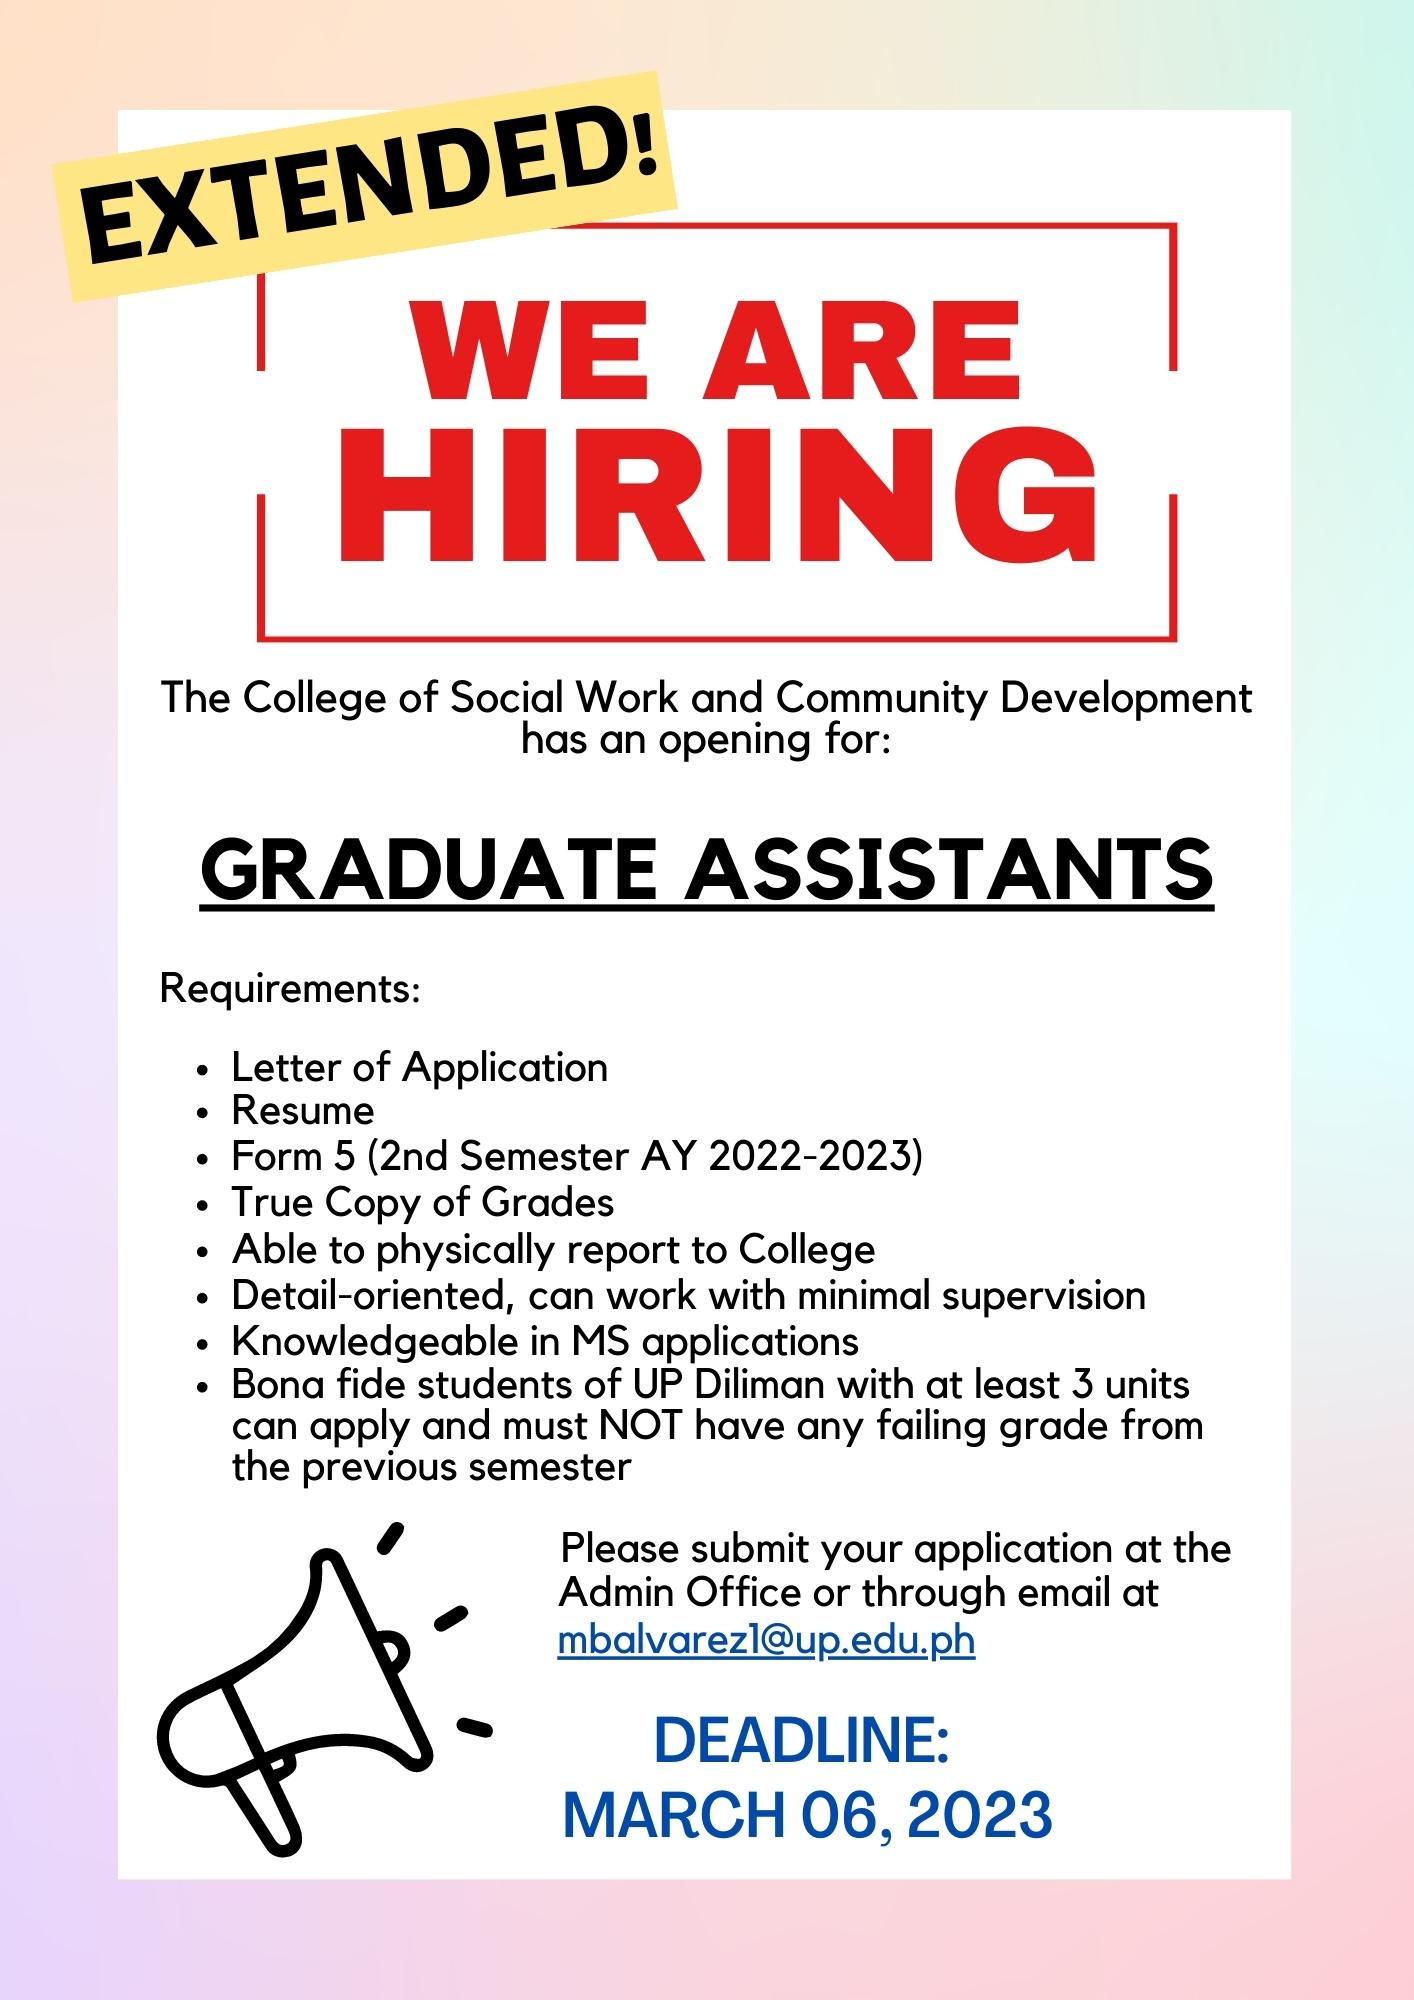 EXTENDED Call for Applications for Graduate Assistants